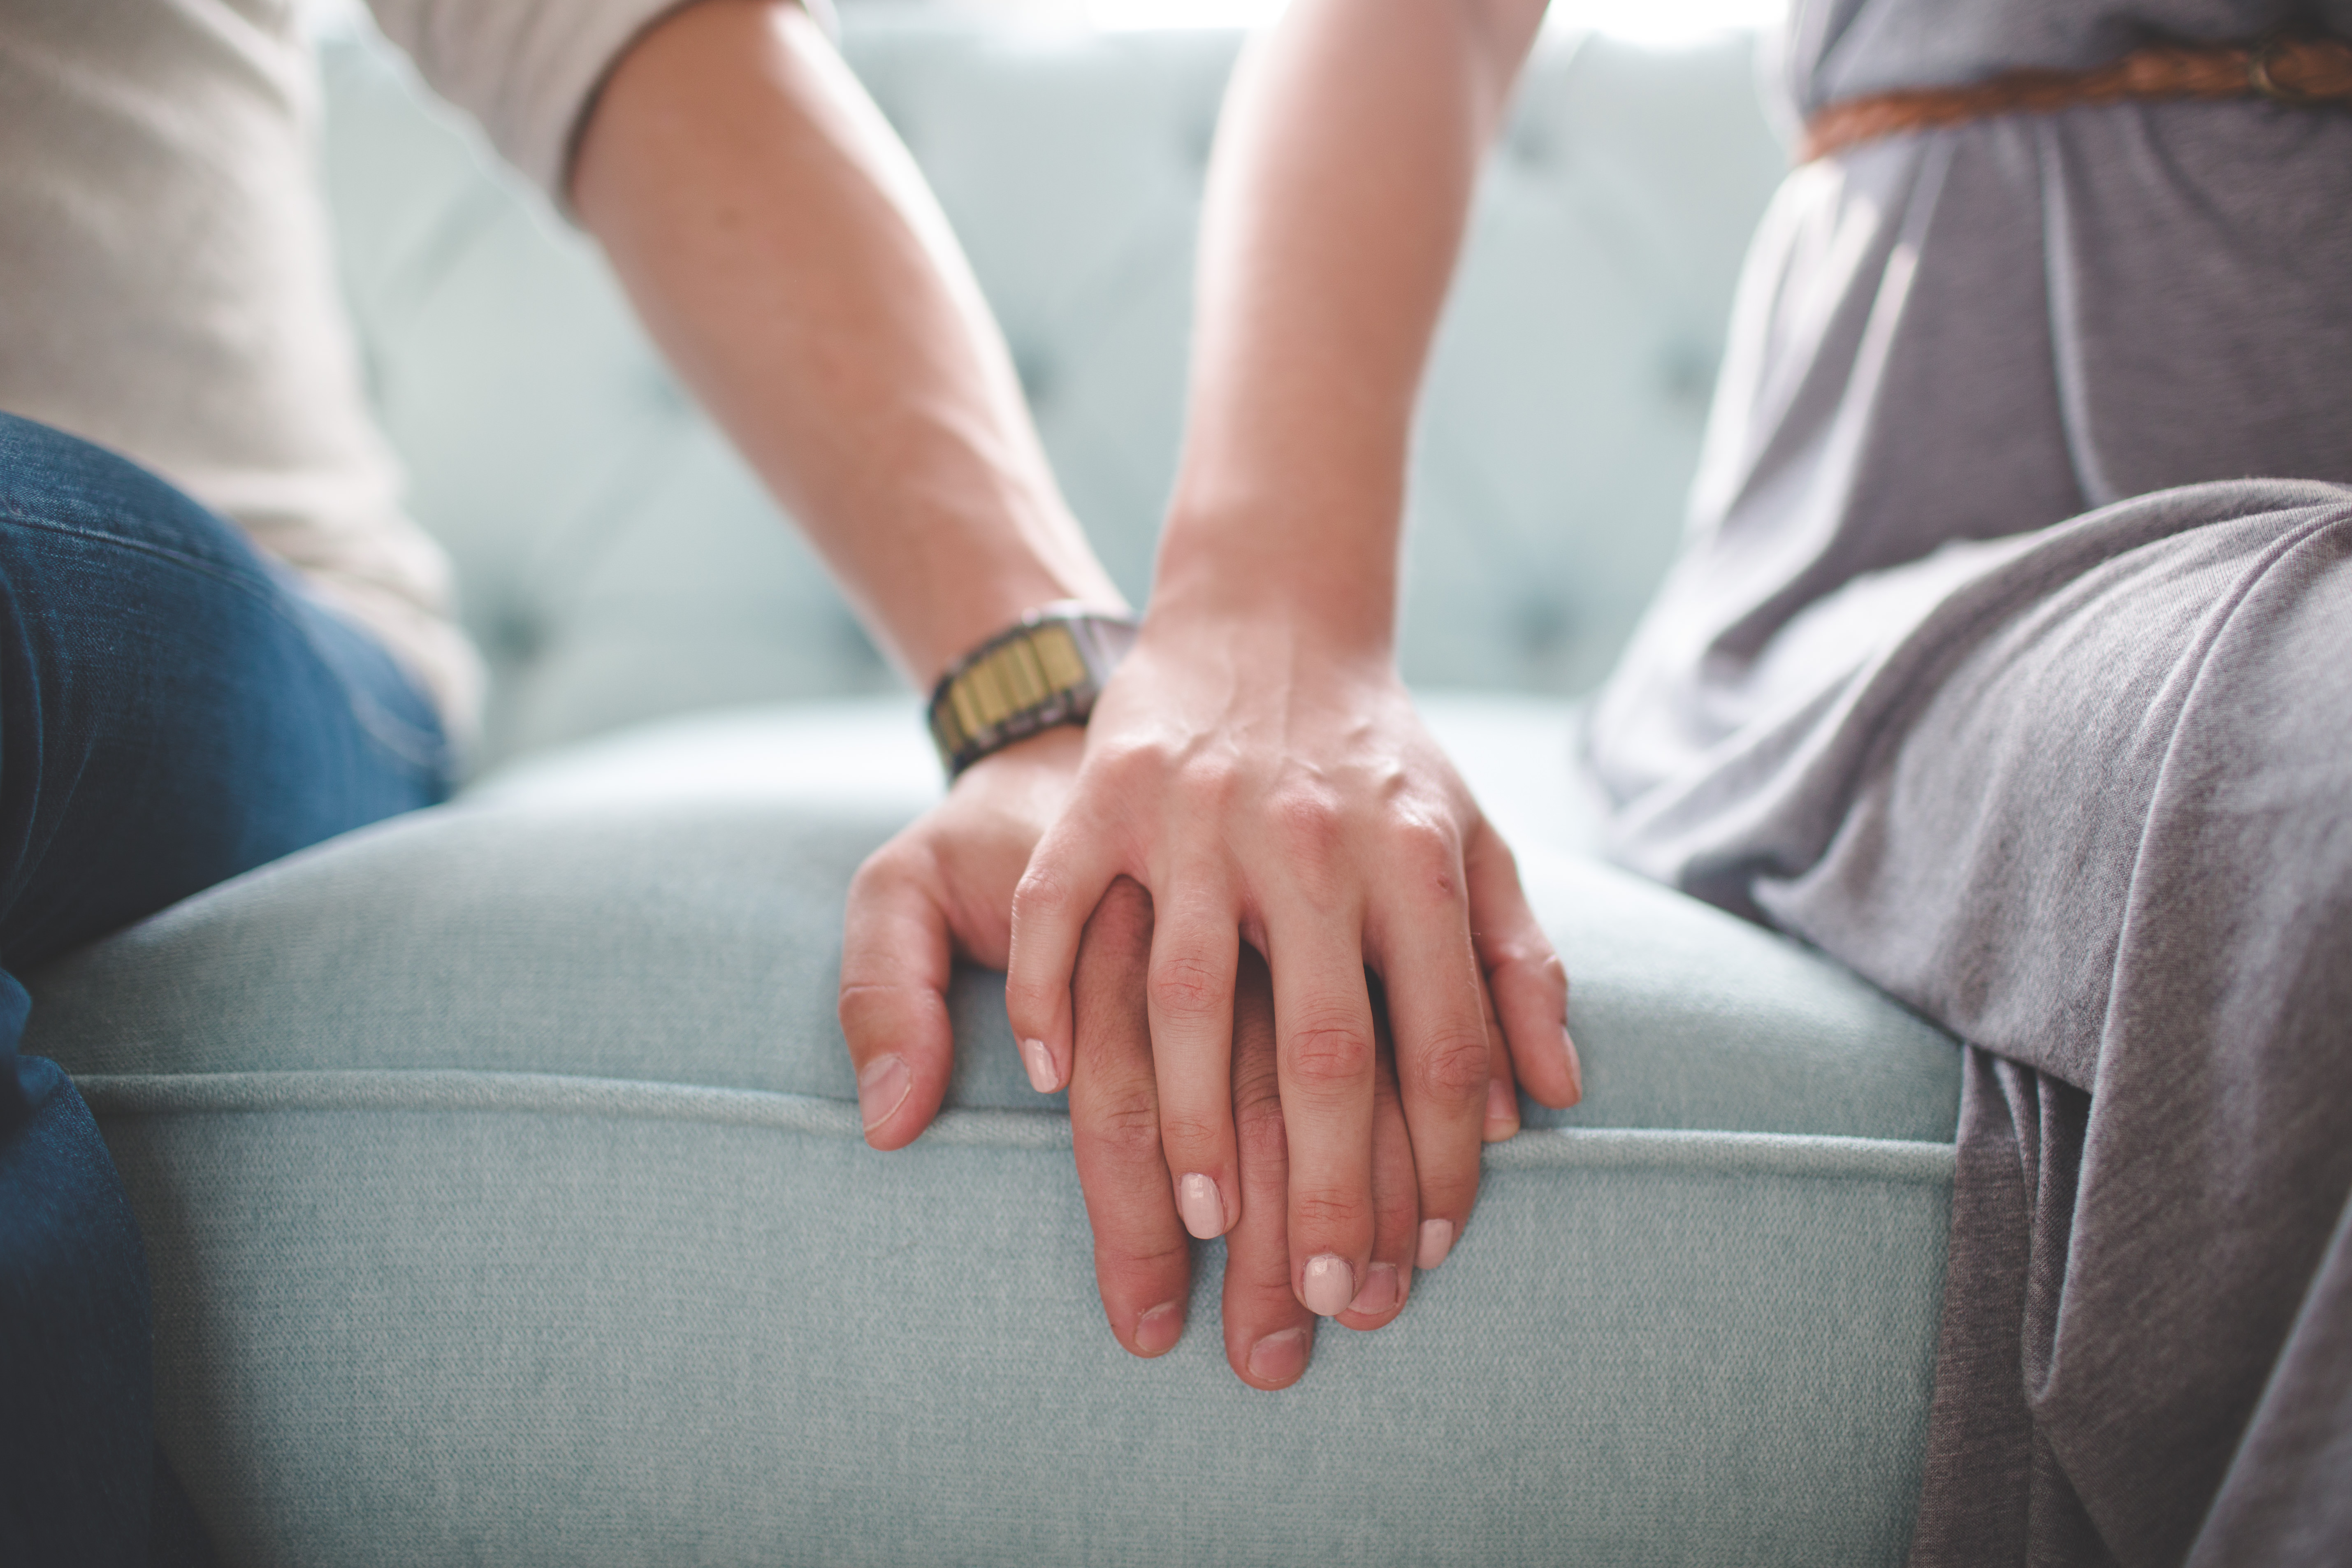 A married couple holding hands | Source: Getty Images